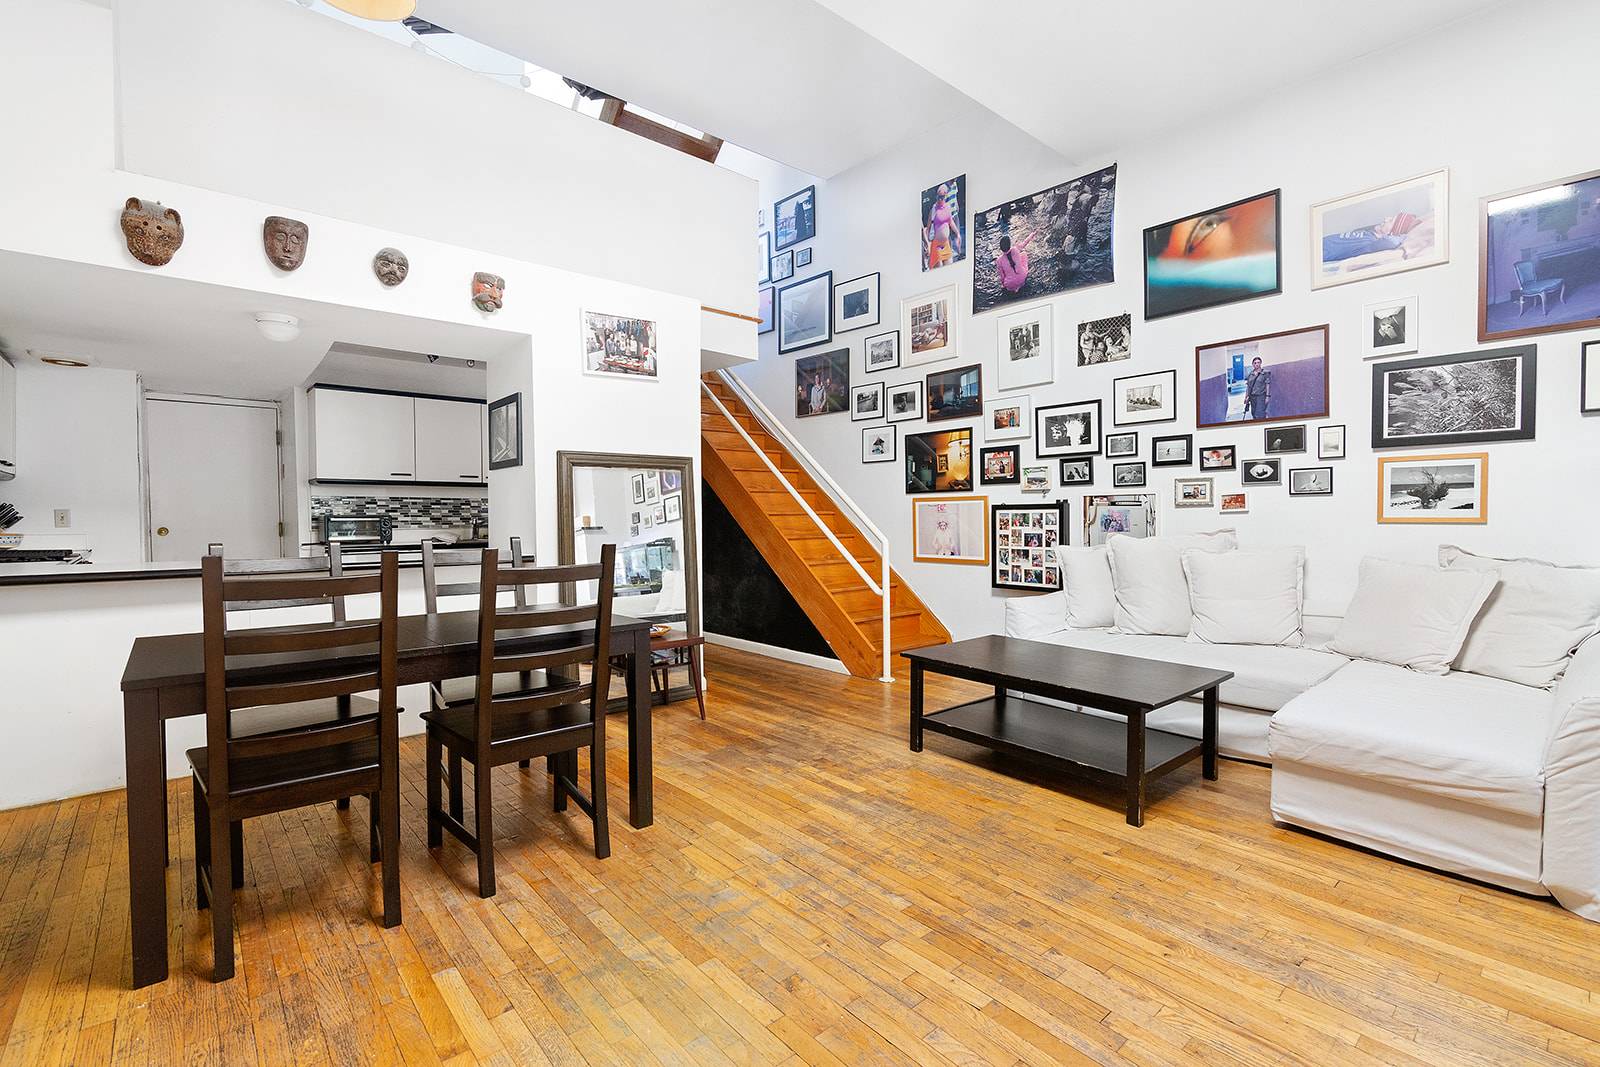 Brooklyn living was never better than in this gorgeous 1, 200 sq ft, 2 bedroom 2 bathroom duplex loft condominium in prime Windsor Terrace, steps from Prospect Park !